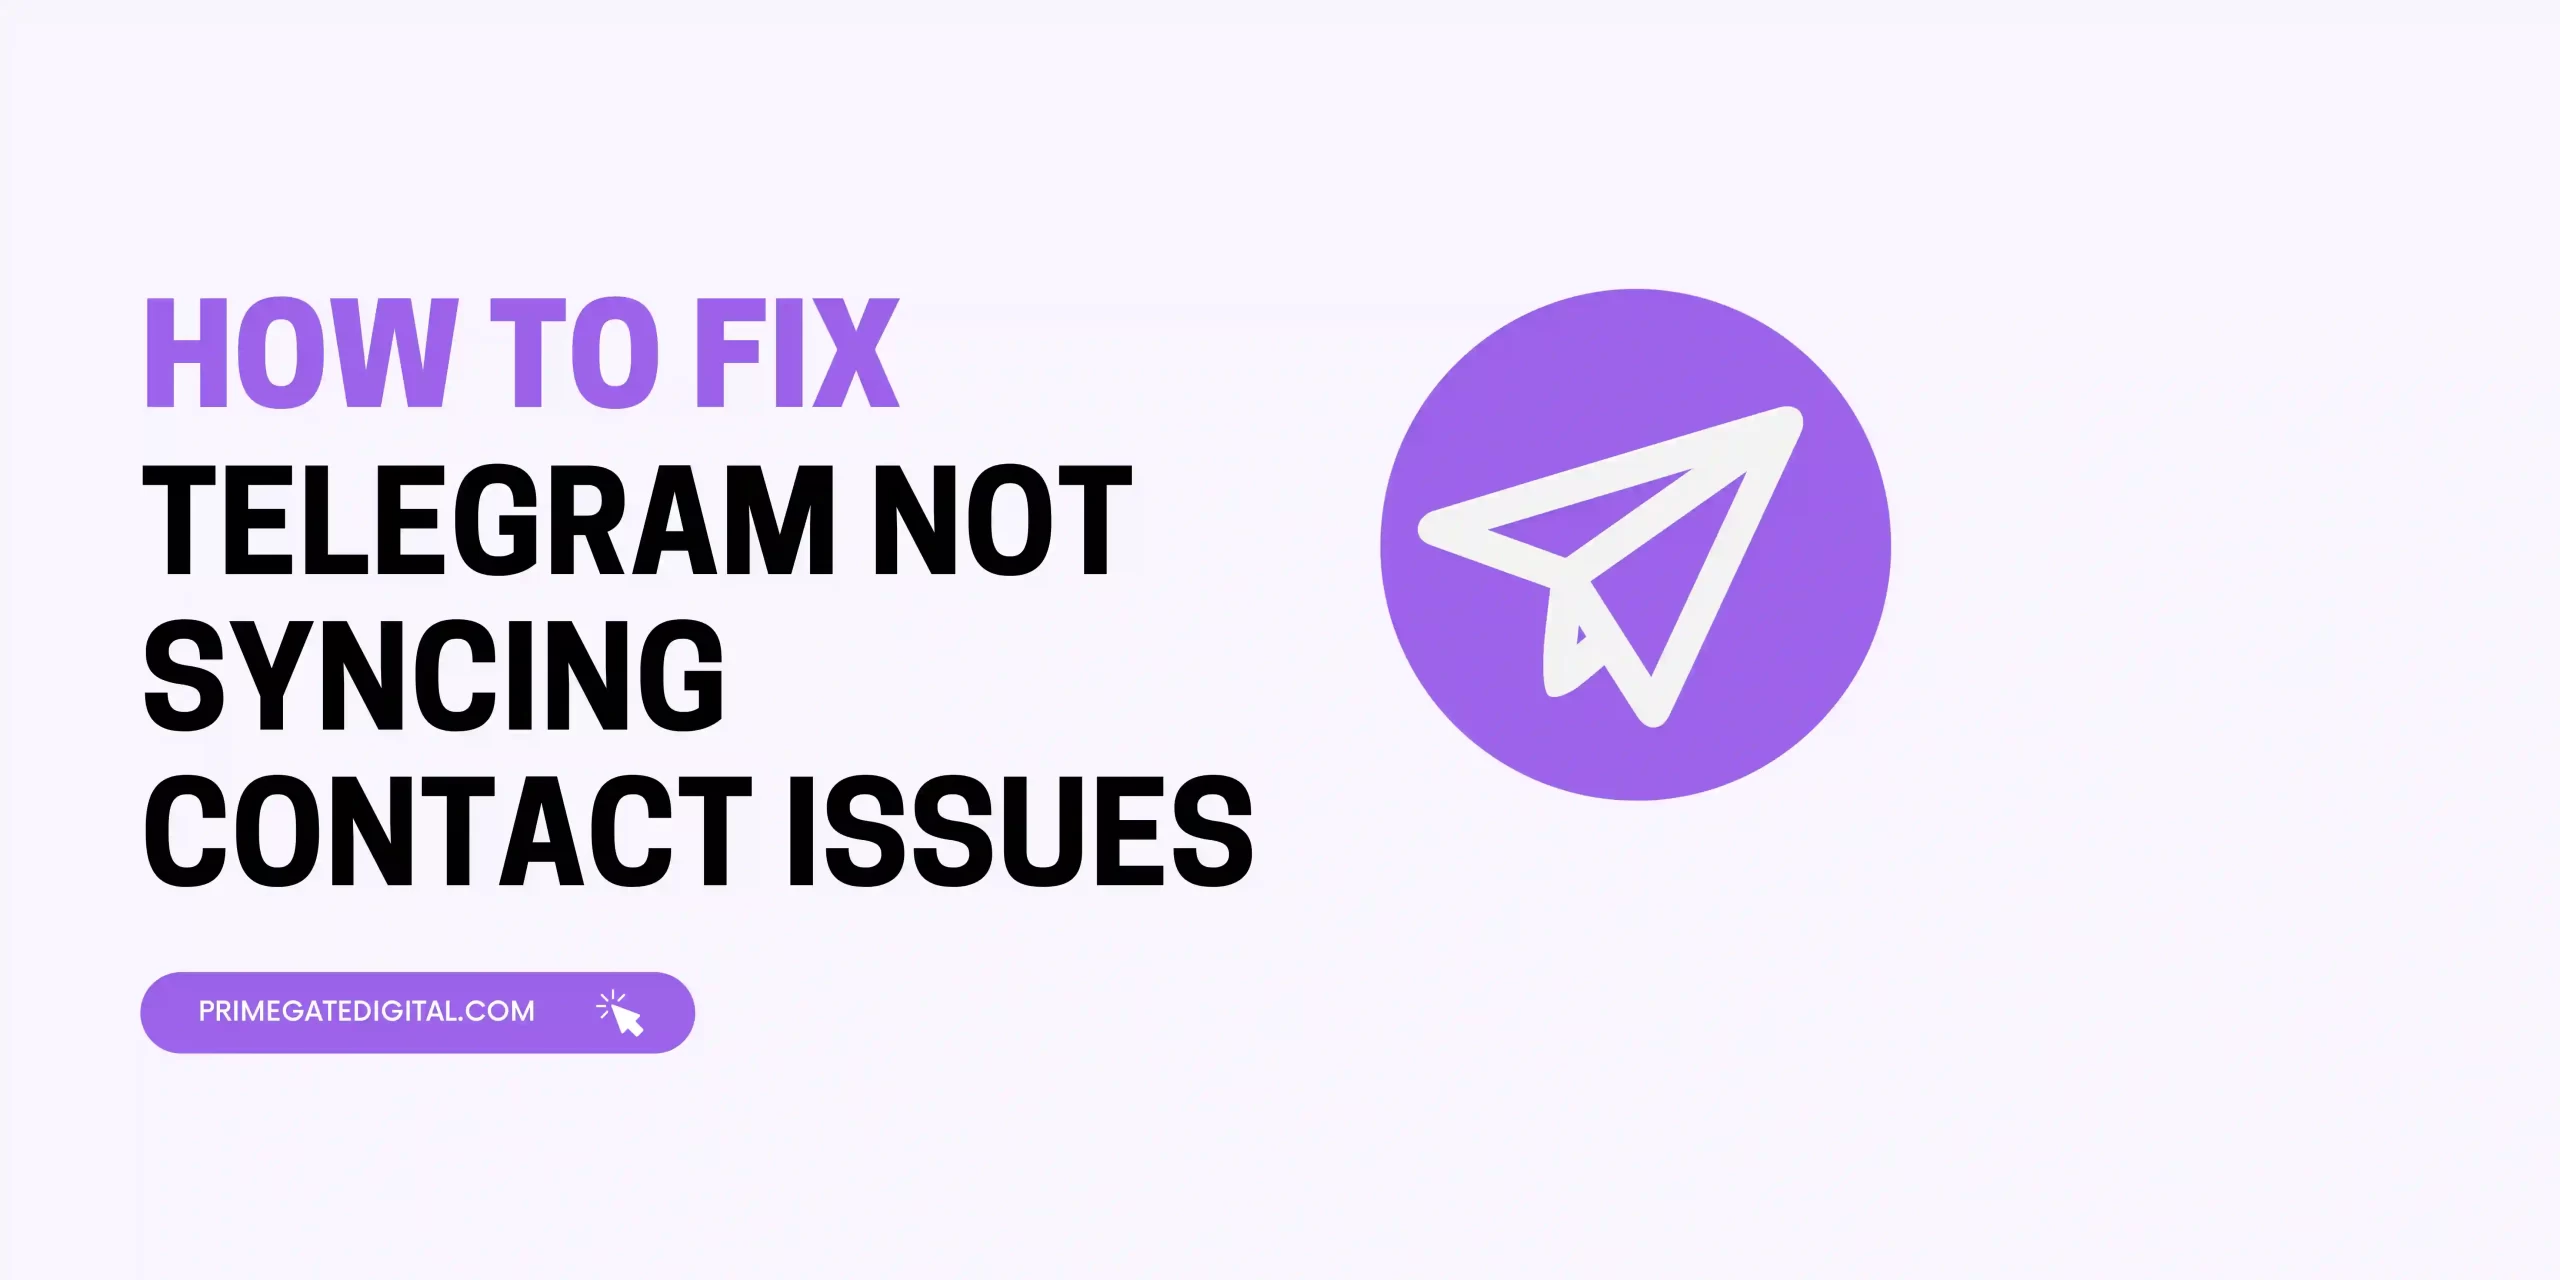 How to Fix Telegram Not Syncing Contact Issues scaled